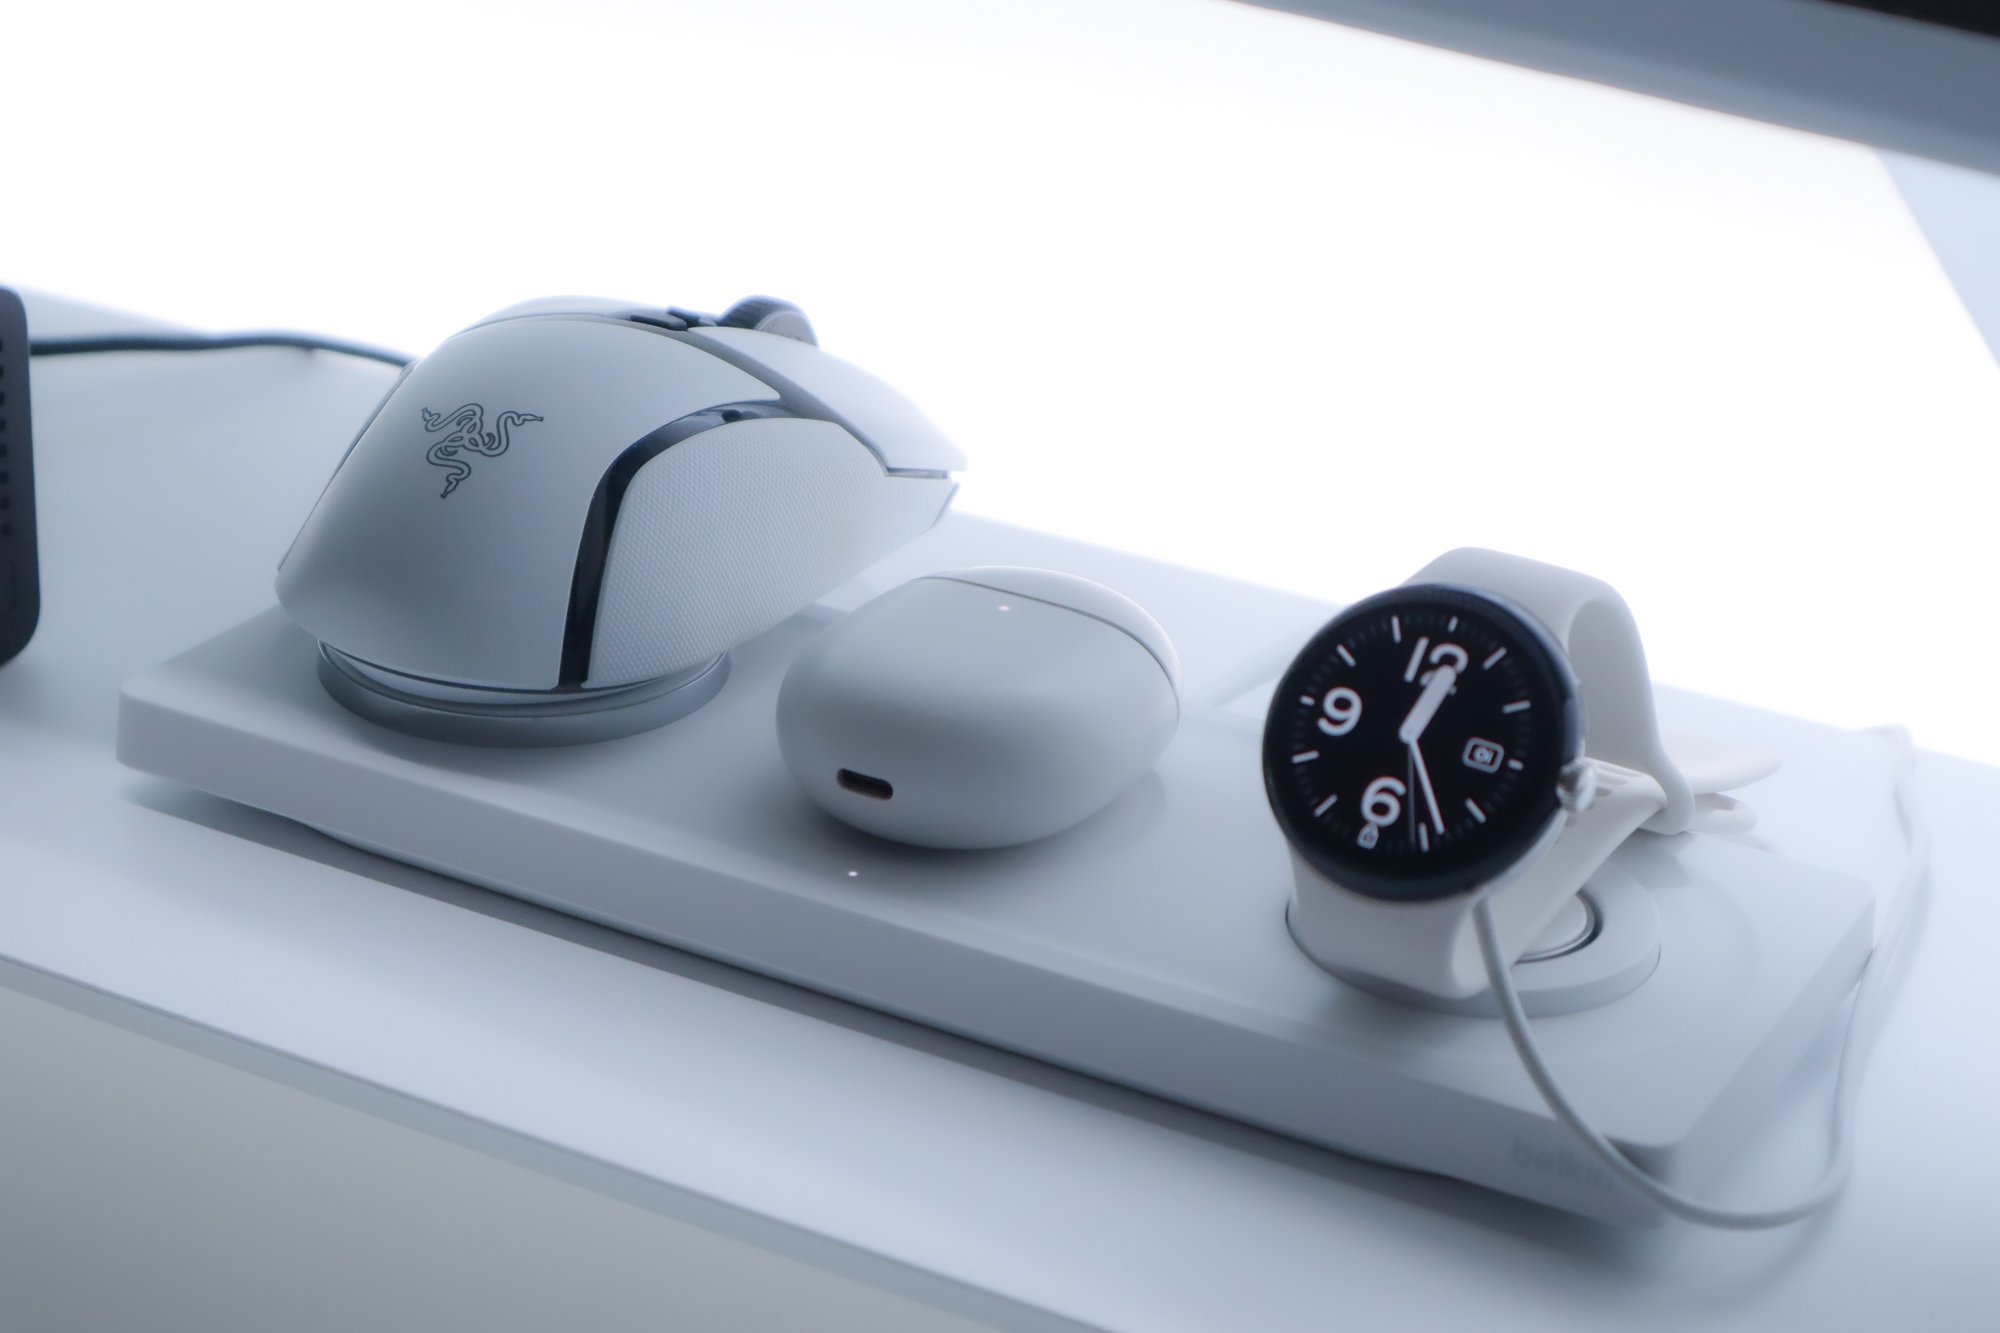 A high-precision gaming mouse, wireless earbuds in a charging case, and a smartwatch with a classic watch face displayed, all neatly placed on a white charging dock